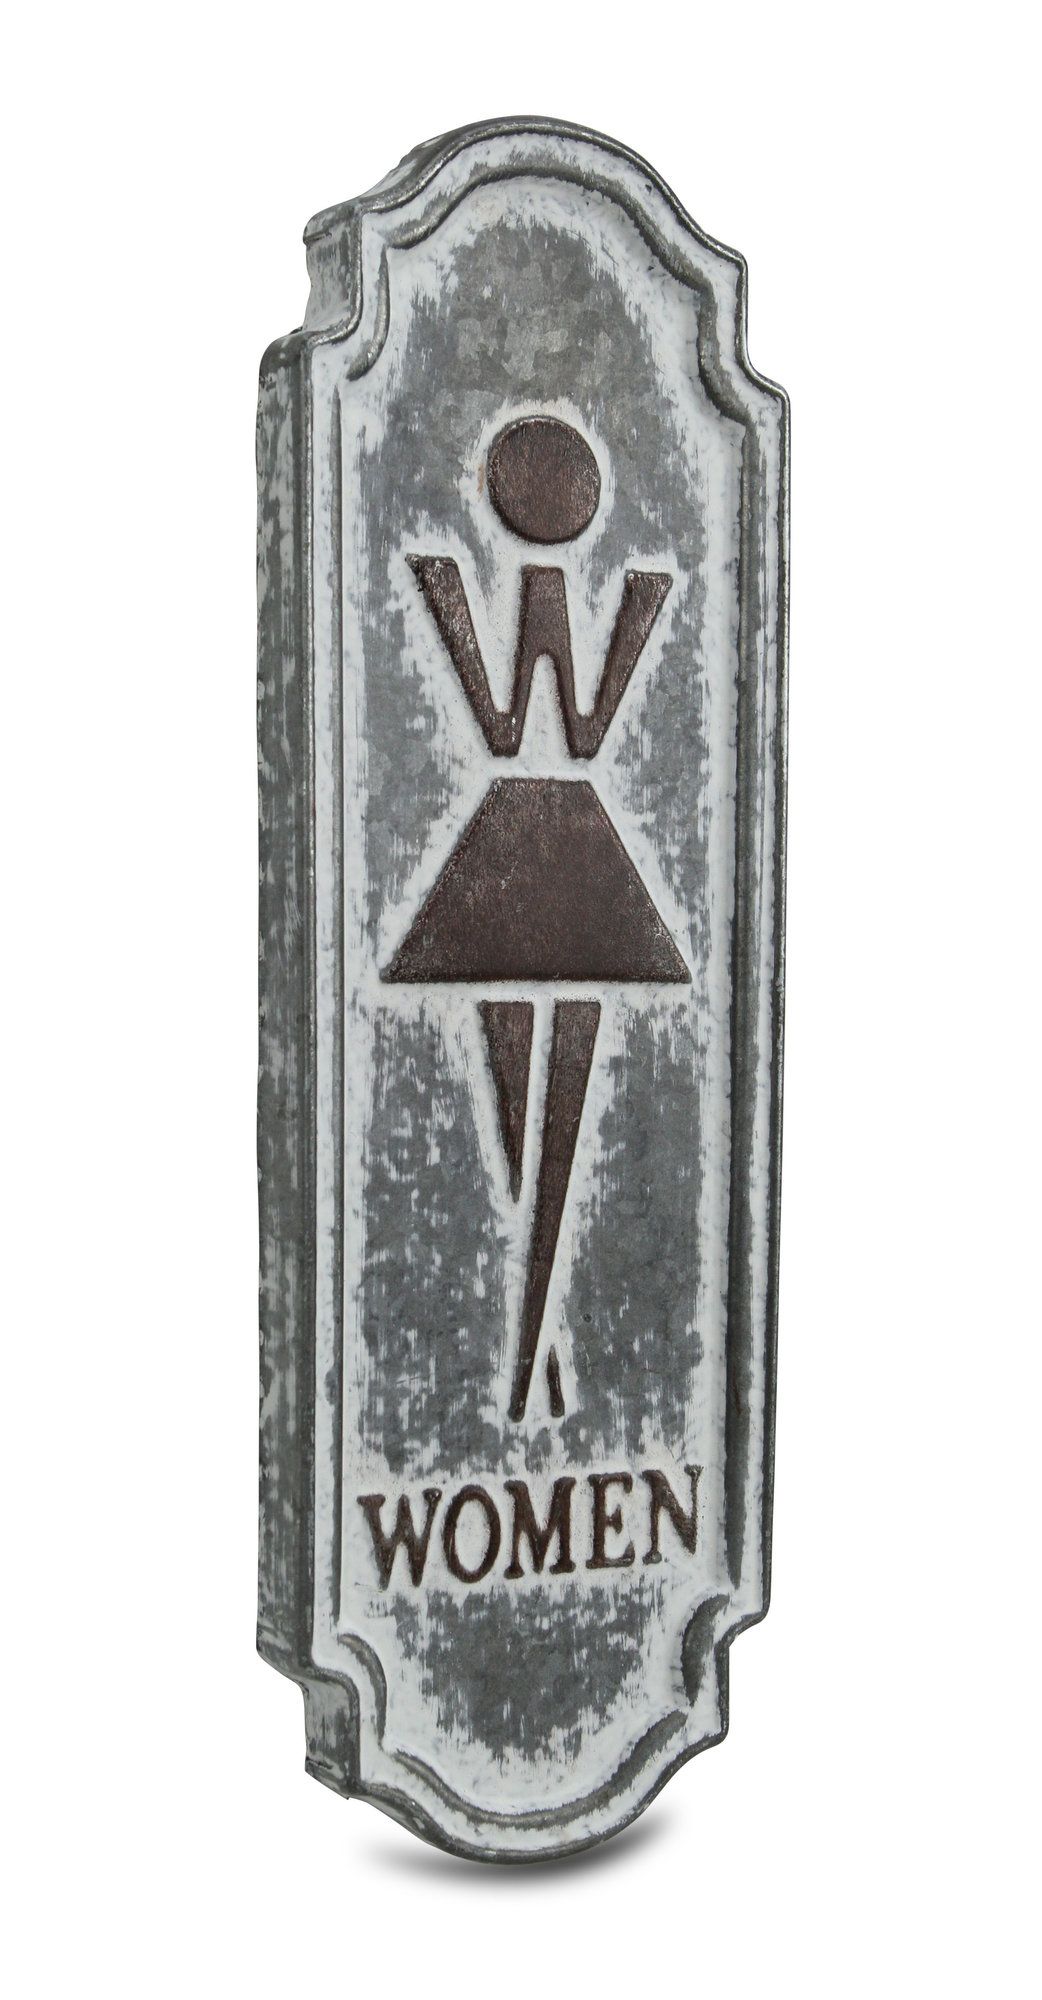 Details About Winston Porter Vintage Womens Room Wall Décor For Metal Laundry Room Wall Decor By Winston Porter (View 22 of 30)